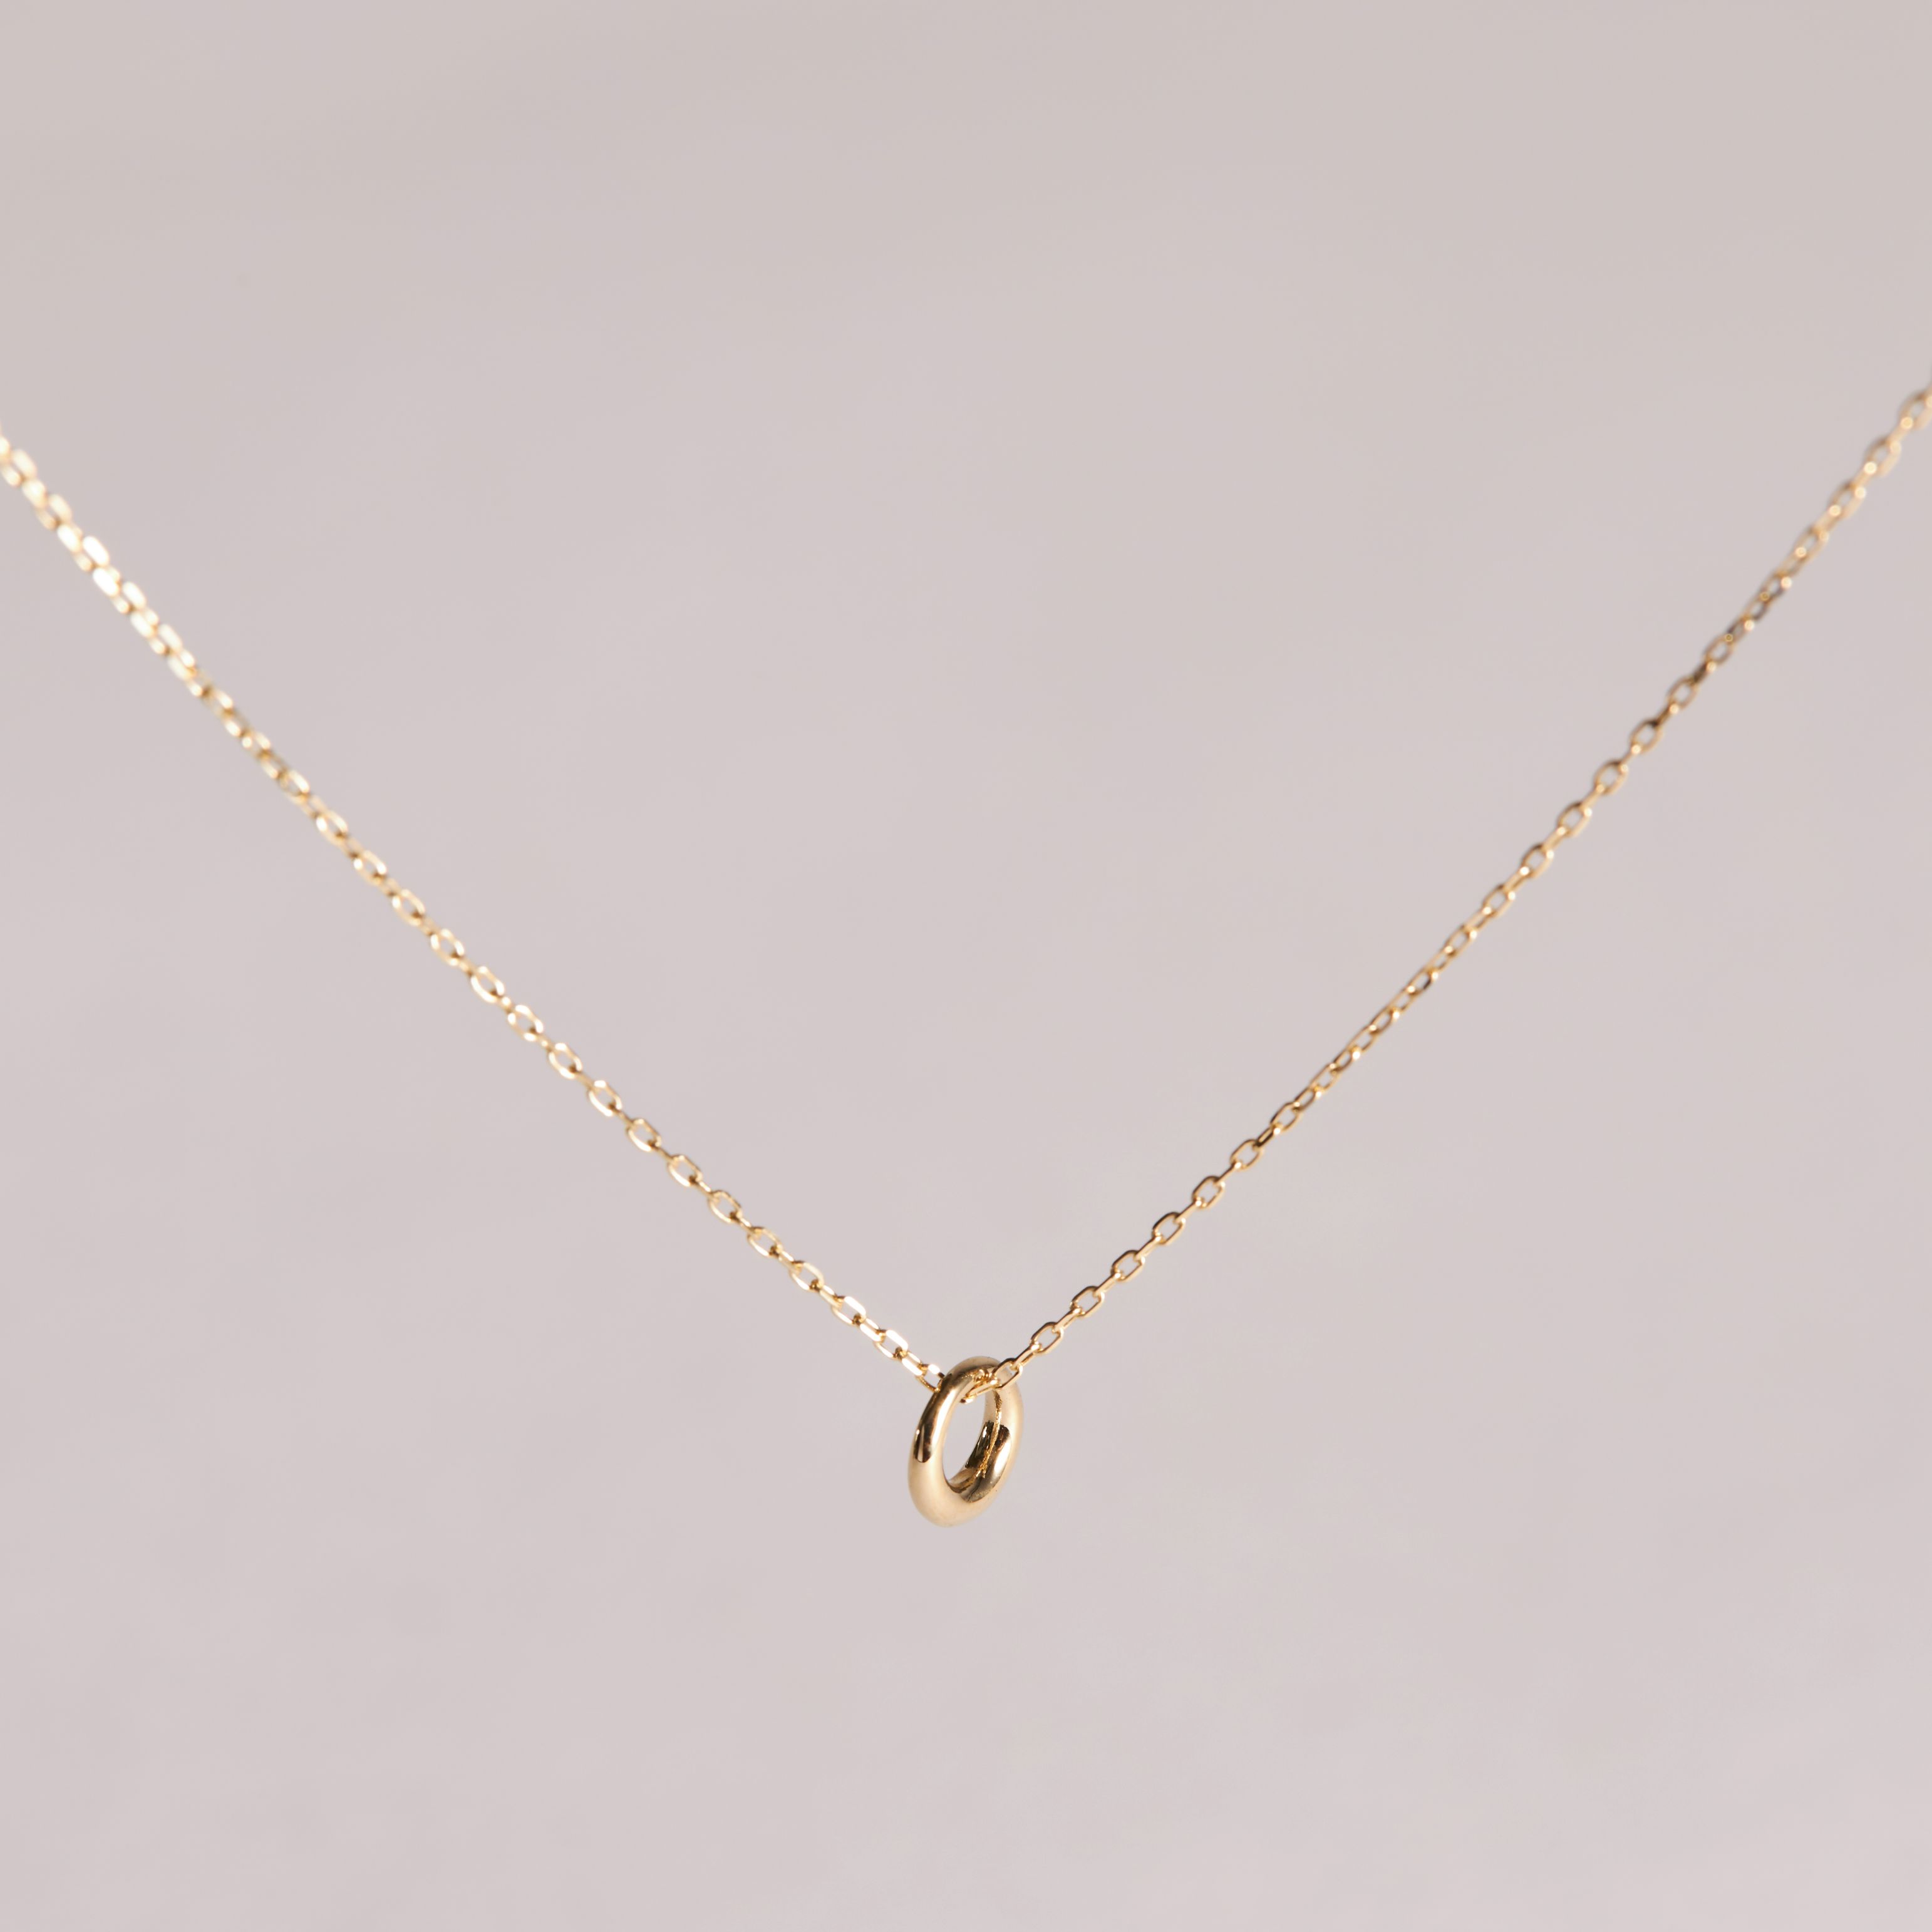 ISTANBUL MOON PENDANT REAL GOLD NECKLACE